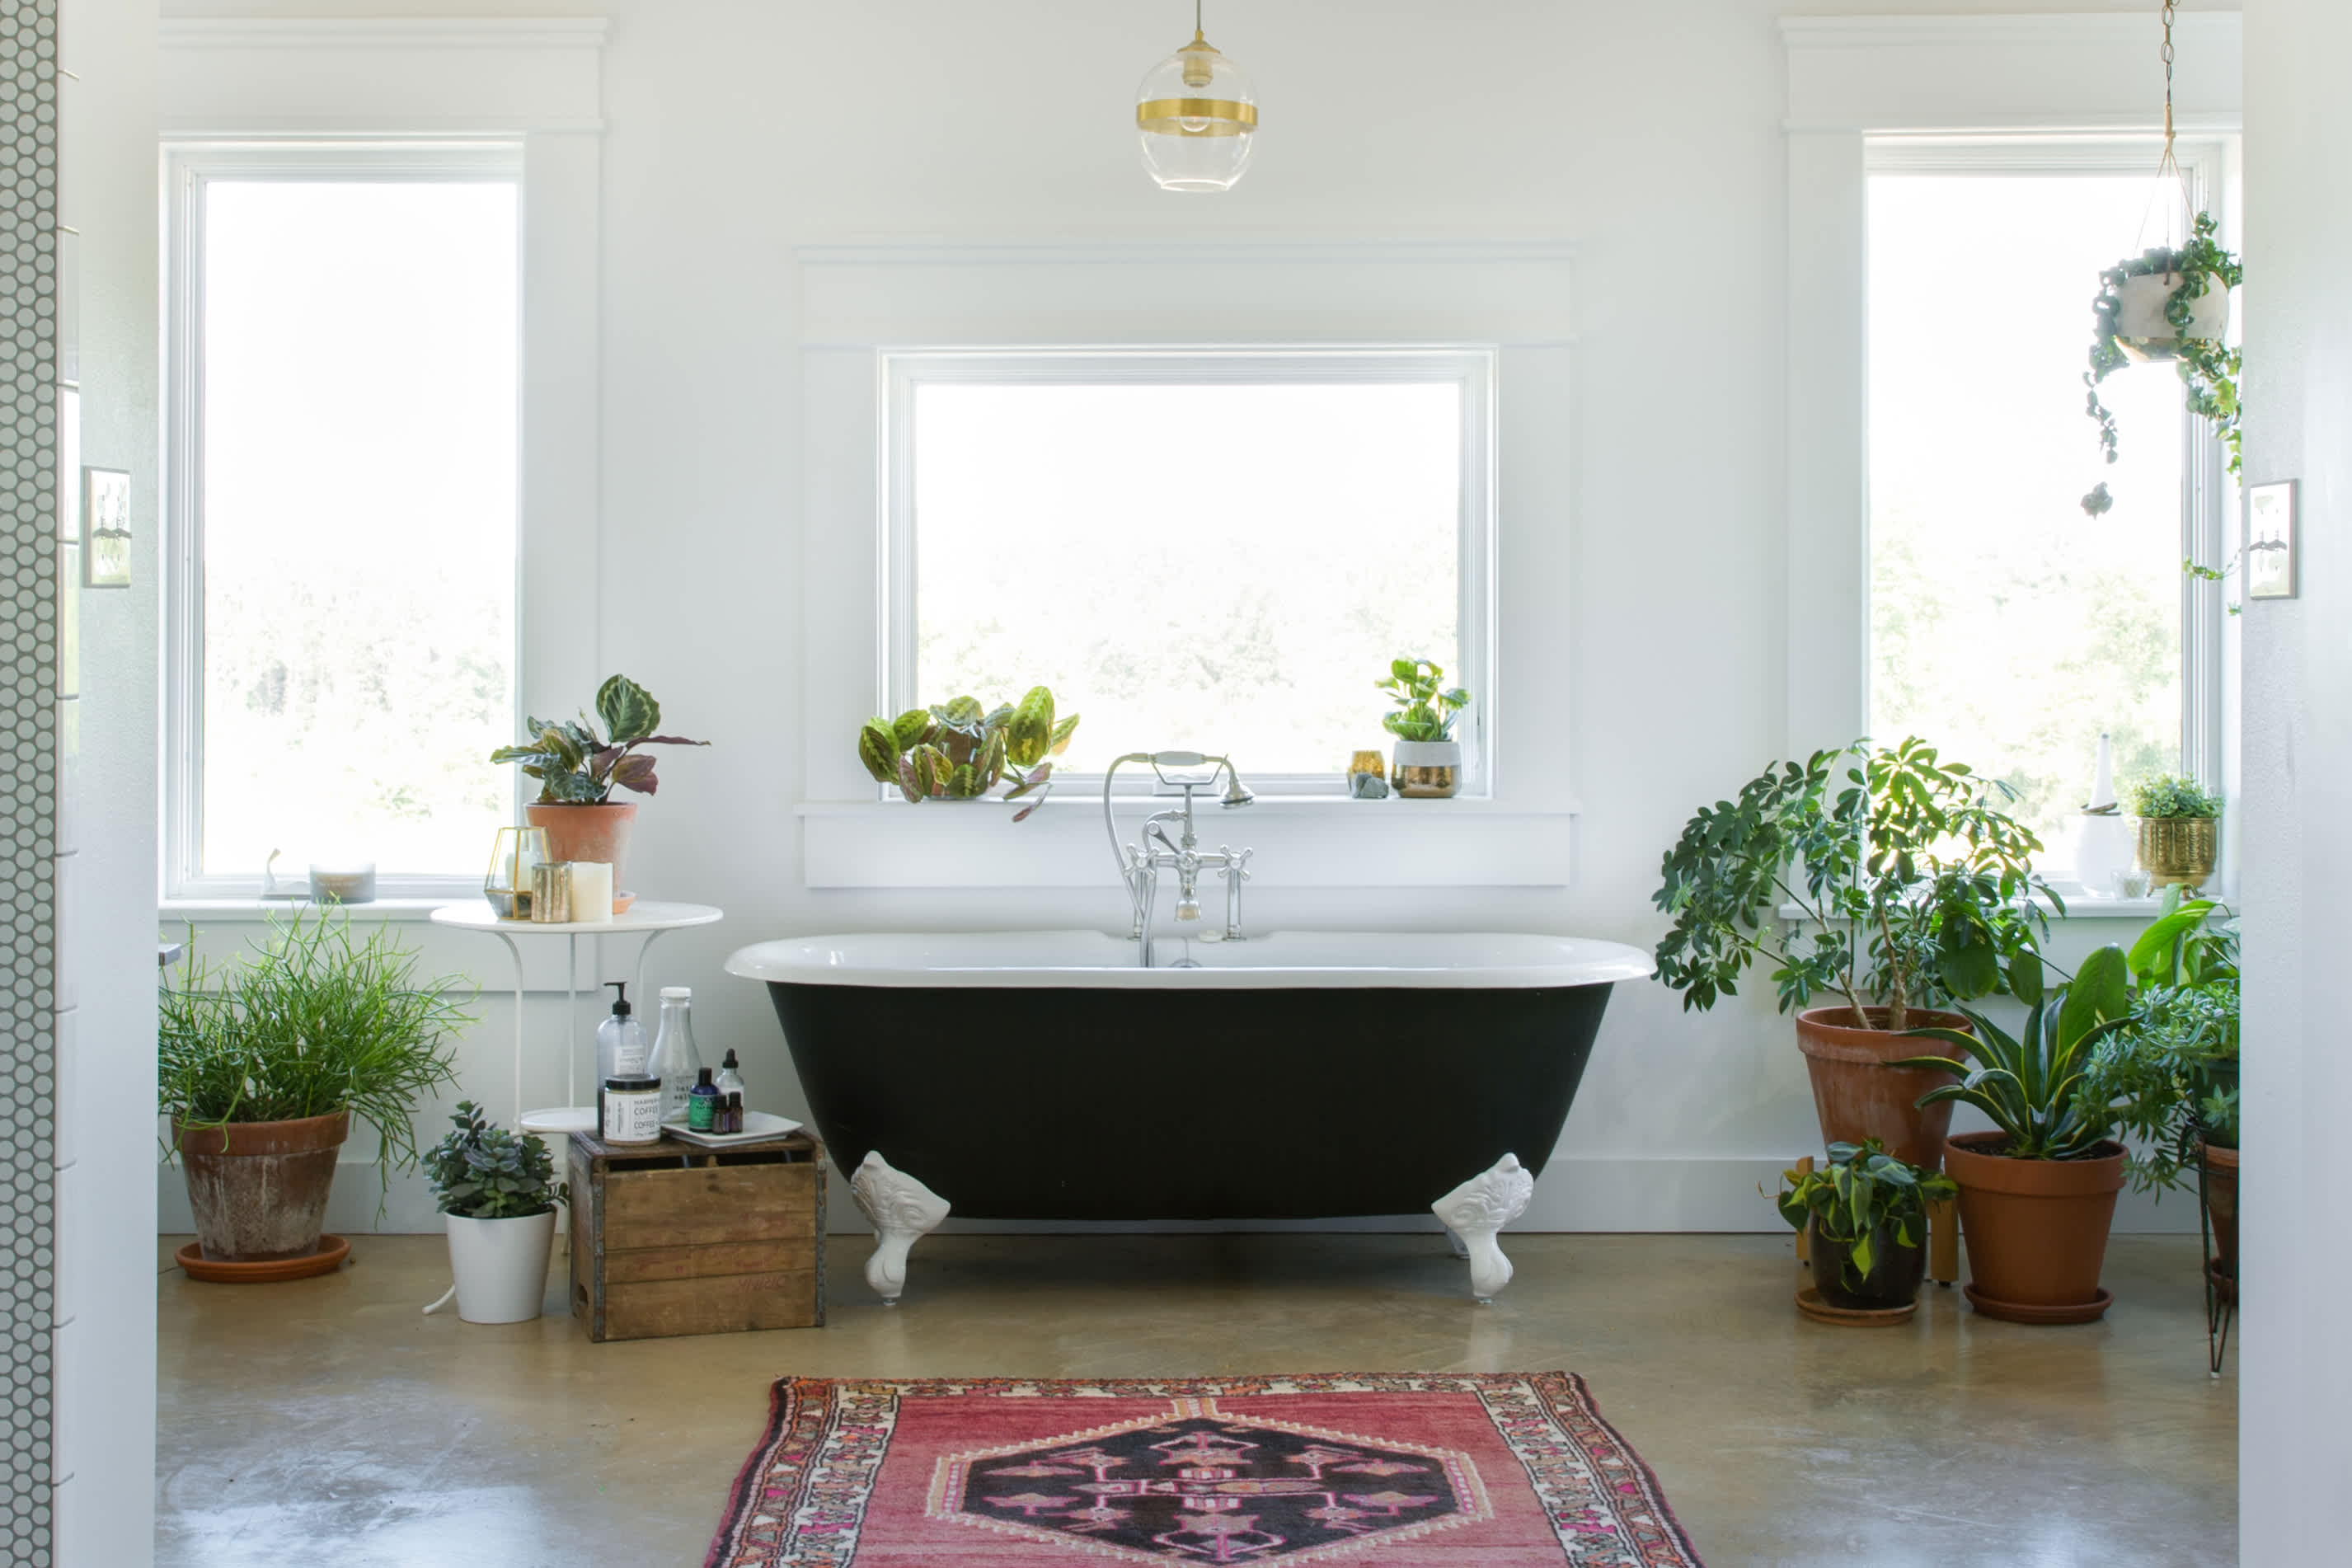 12 Must-Haves for a Designer's Dream Bathroom